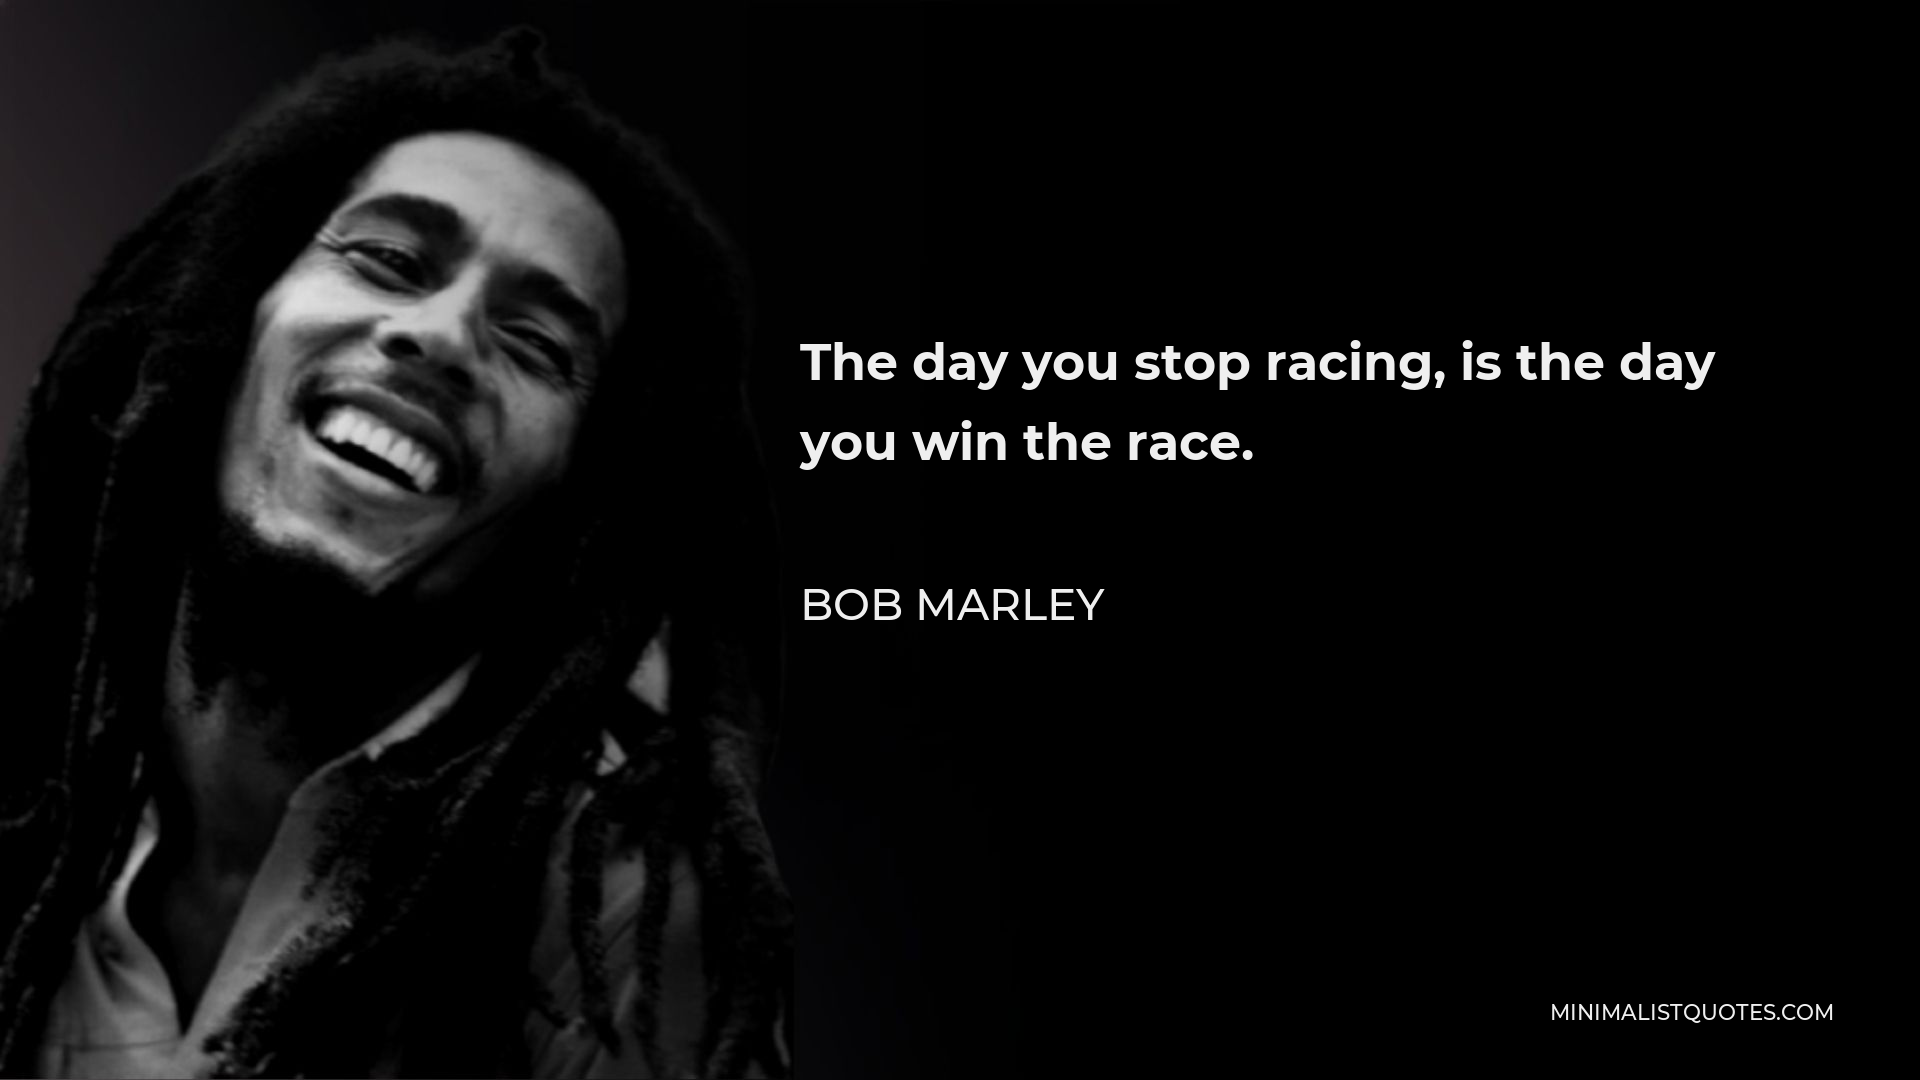 Bob Marley Quote - The day you stop racing, is the day you win the race.